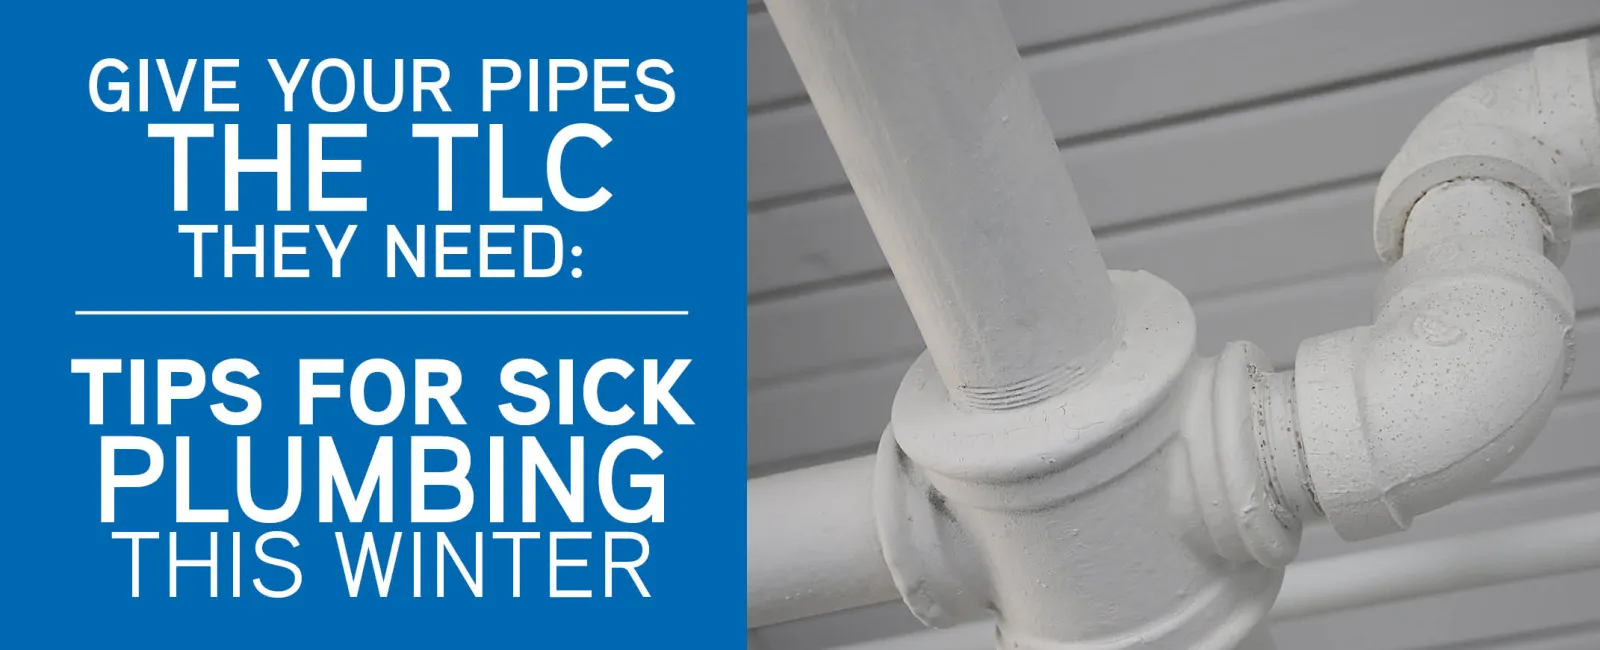 Tips for Sick Plumbing This Winter